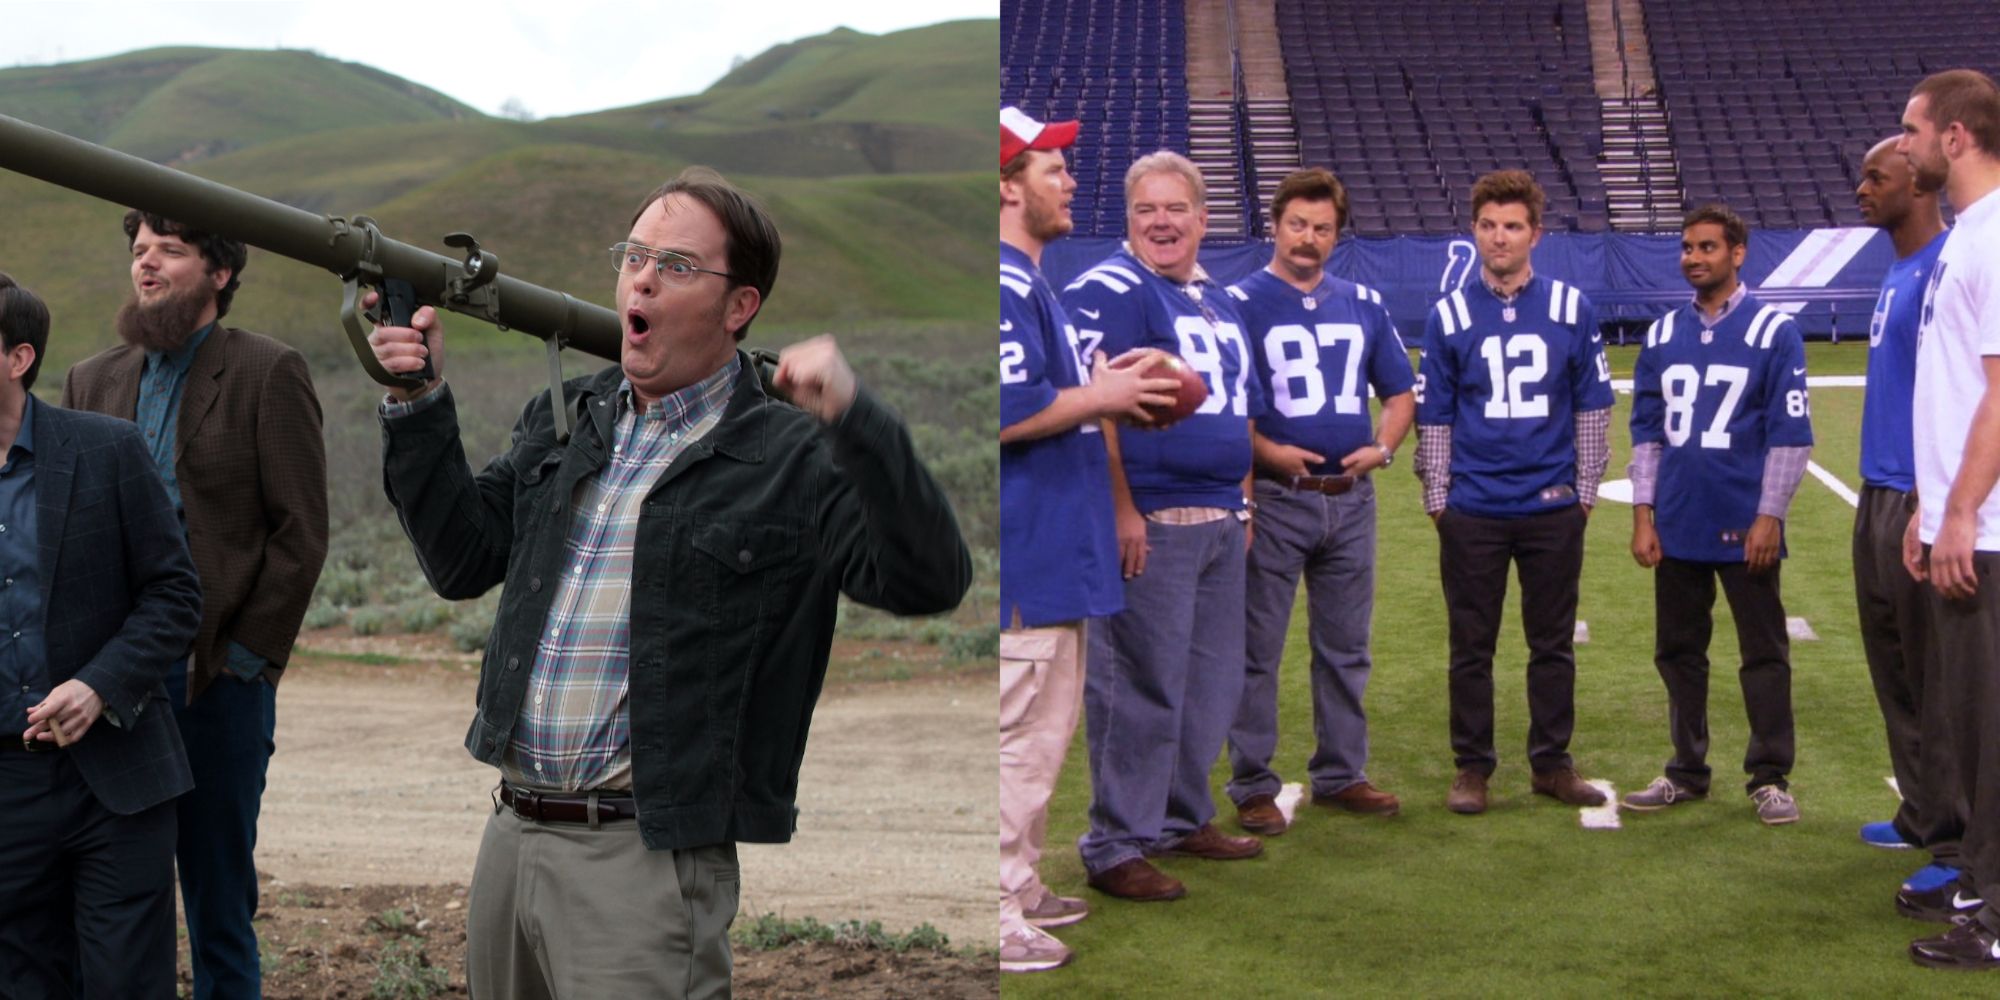 Dwight Schrute holding a bazooka and Parks and Rec cast at Lucasoil stadium wearing Colts jerseys